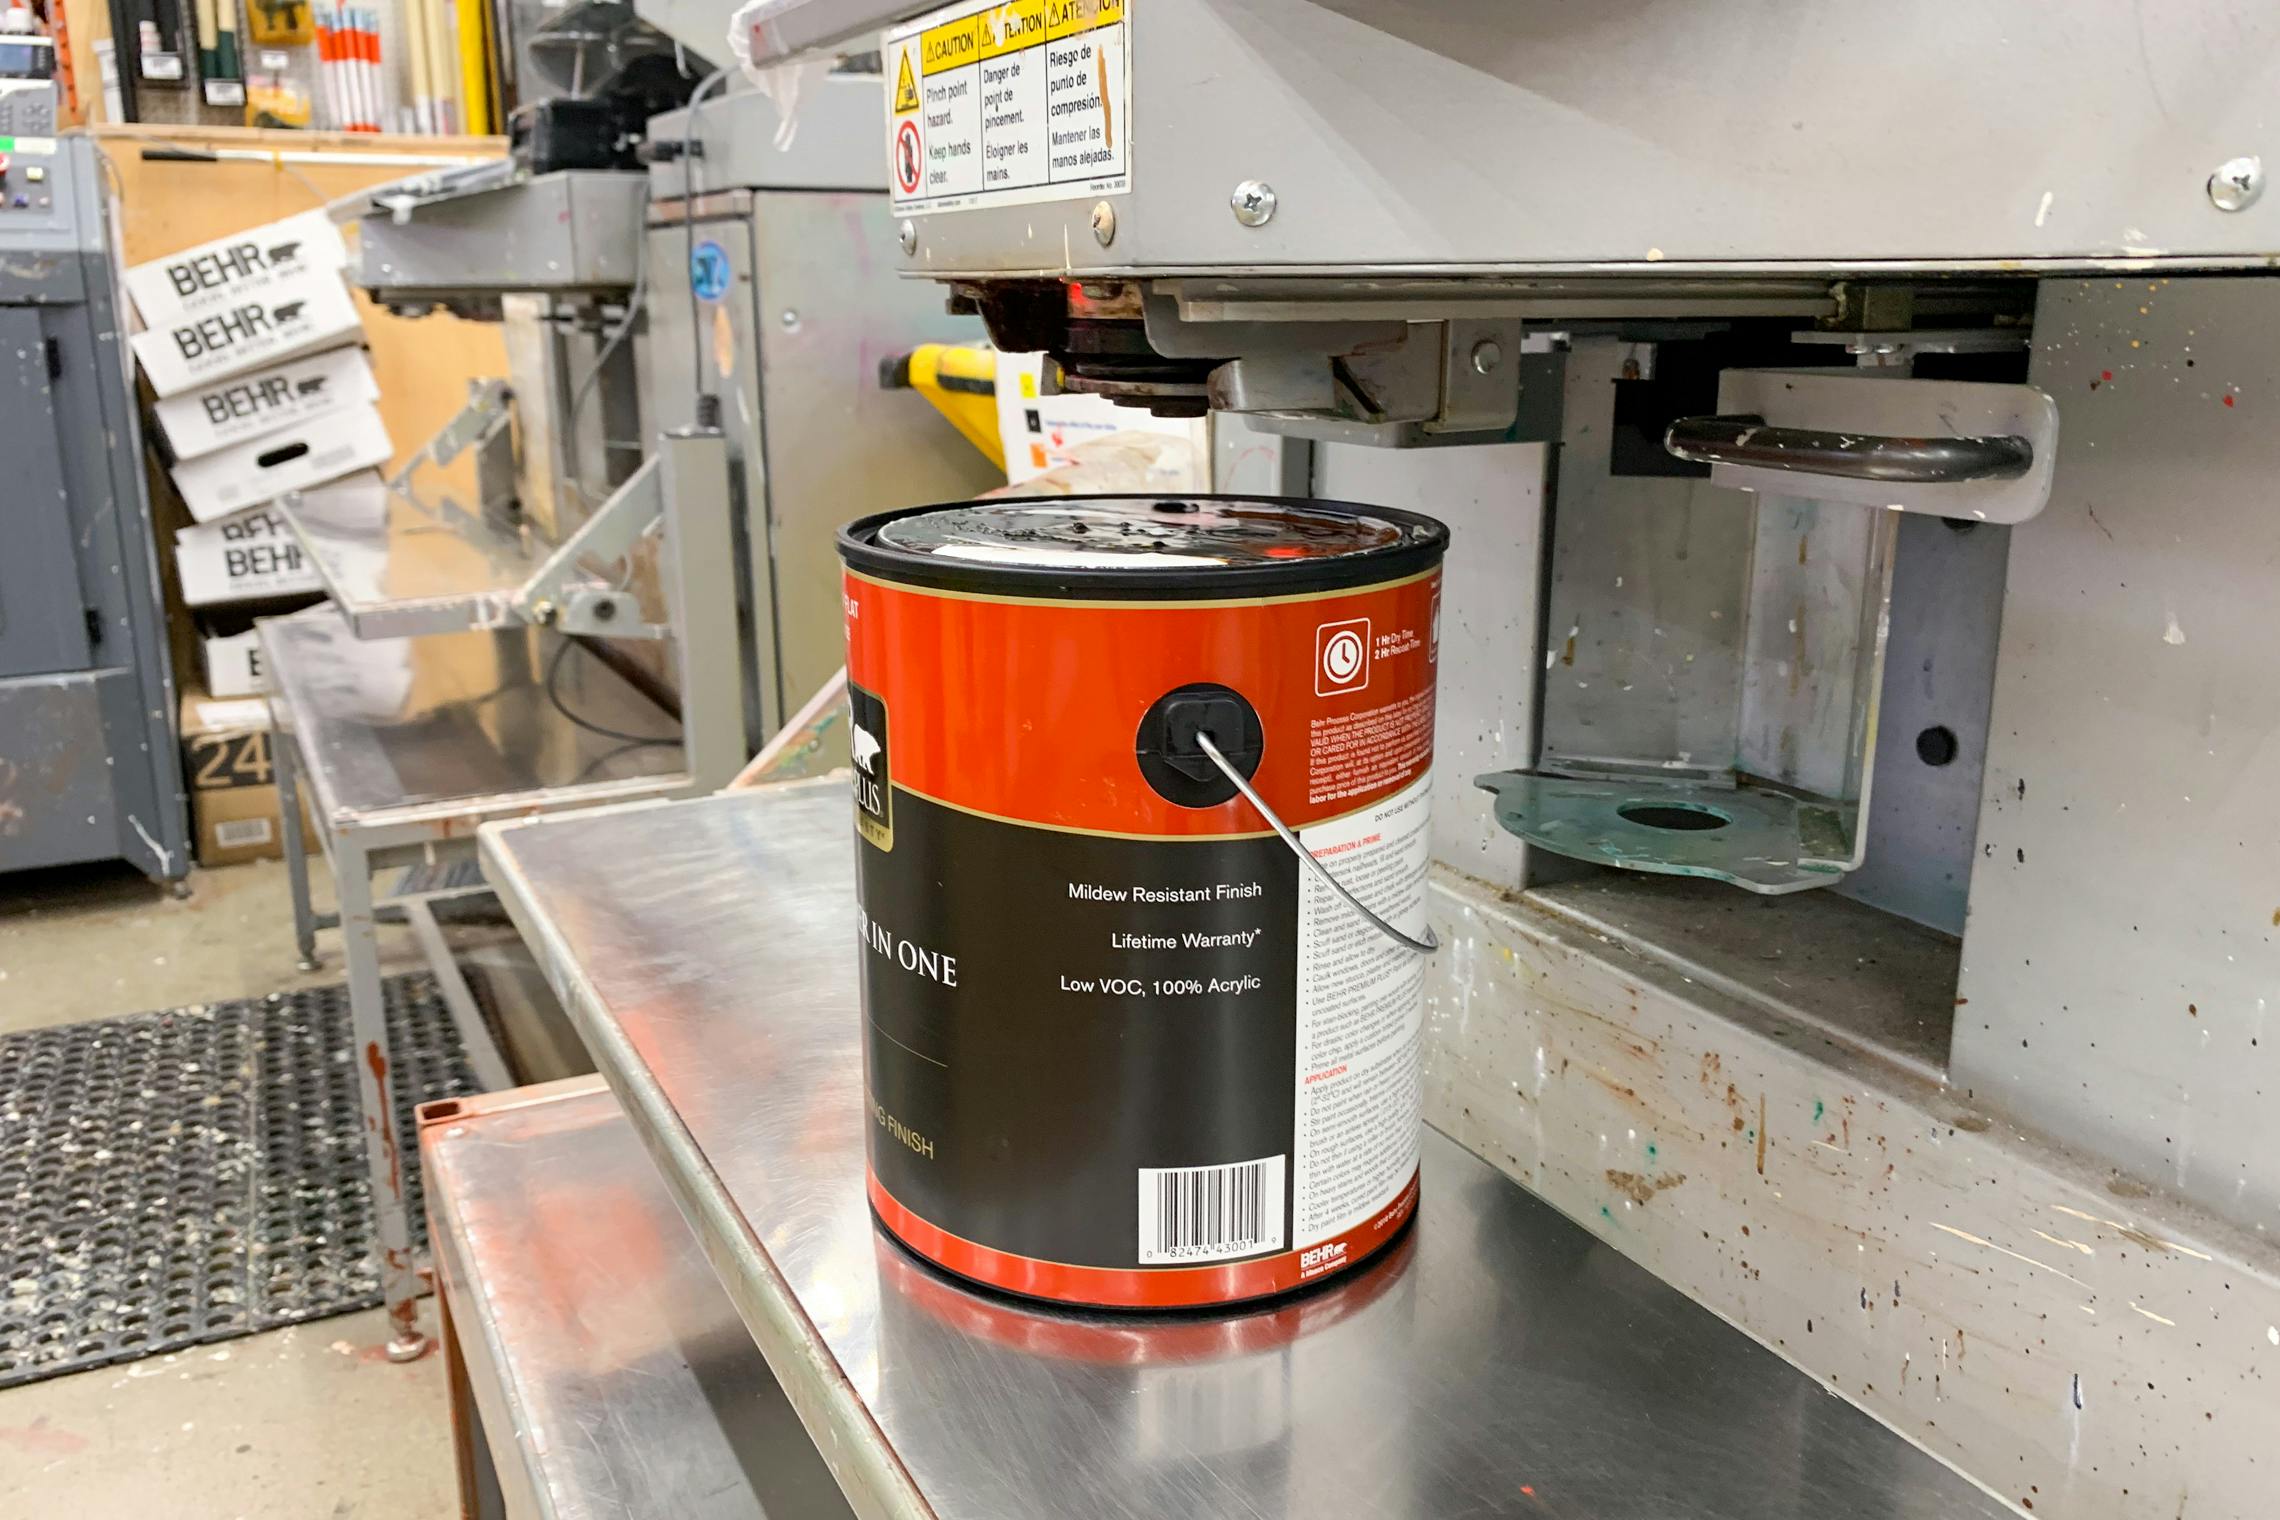 An open can of paint sitting below the machine used for tinting paint.